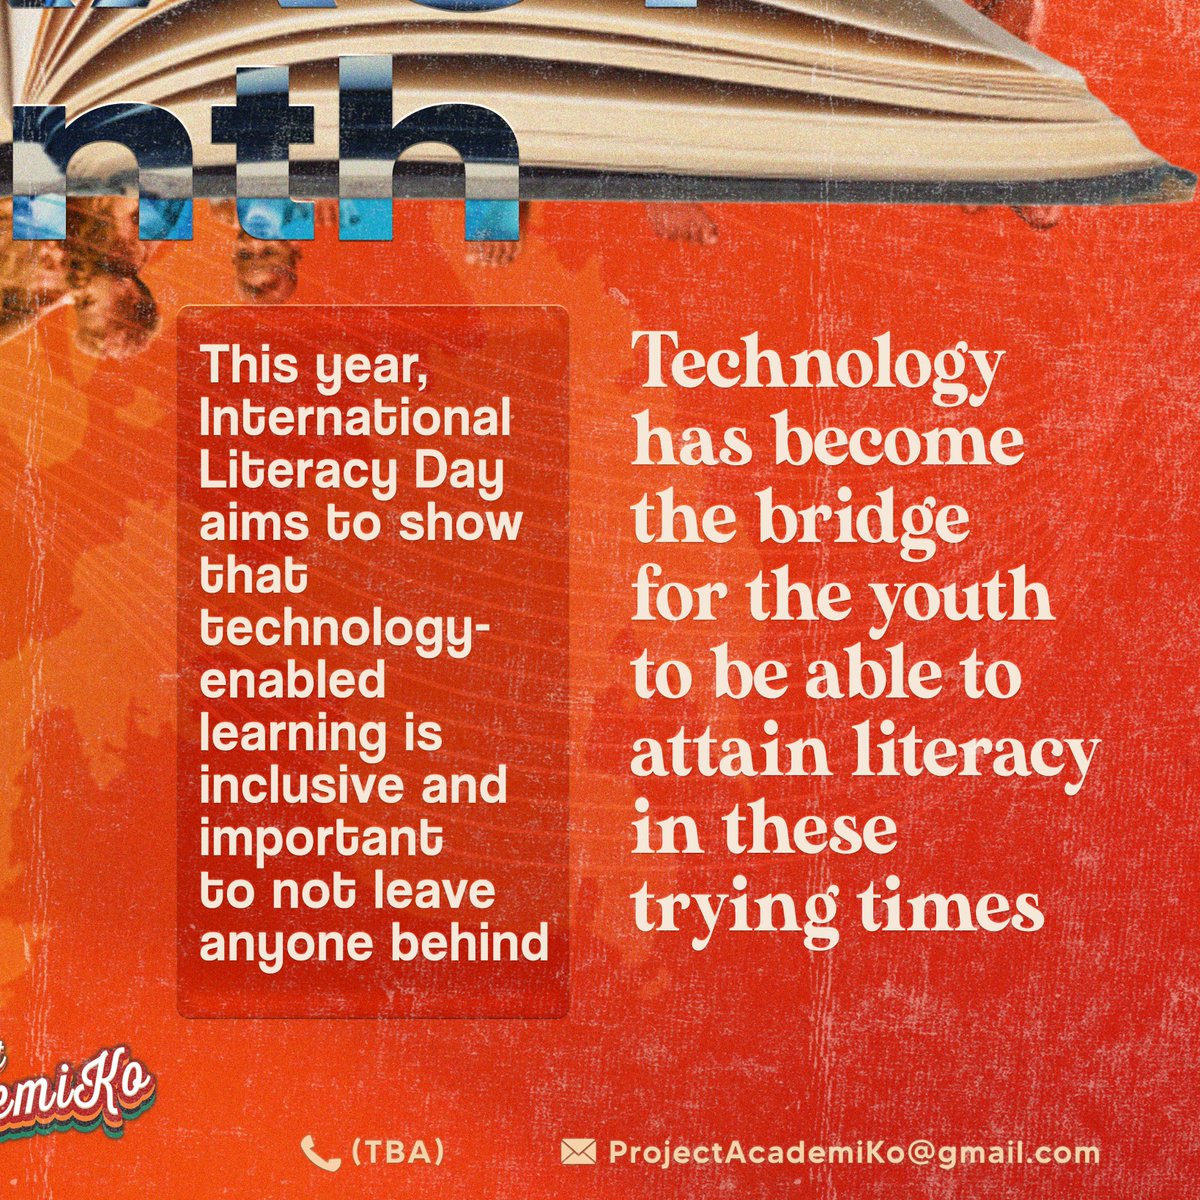 You’re blessed if you can read and understand this! This year's #InternationalLiteracyDay emphasizes the importance of making sure that no one is left behind! #LiteracyIsForEveryone